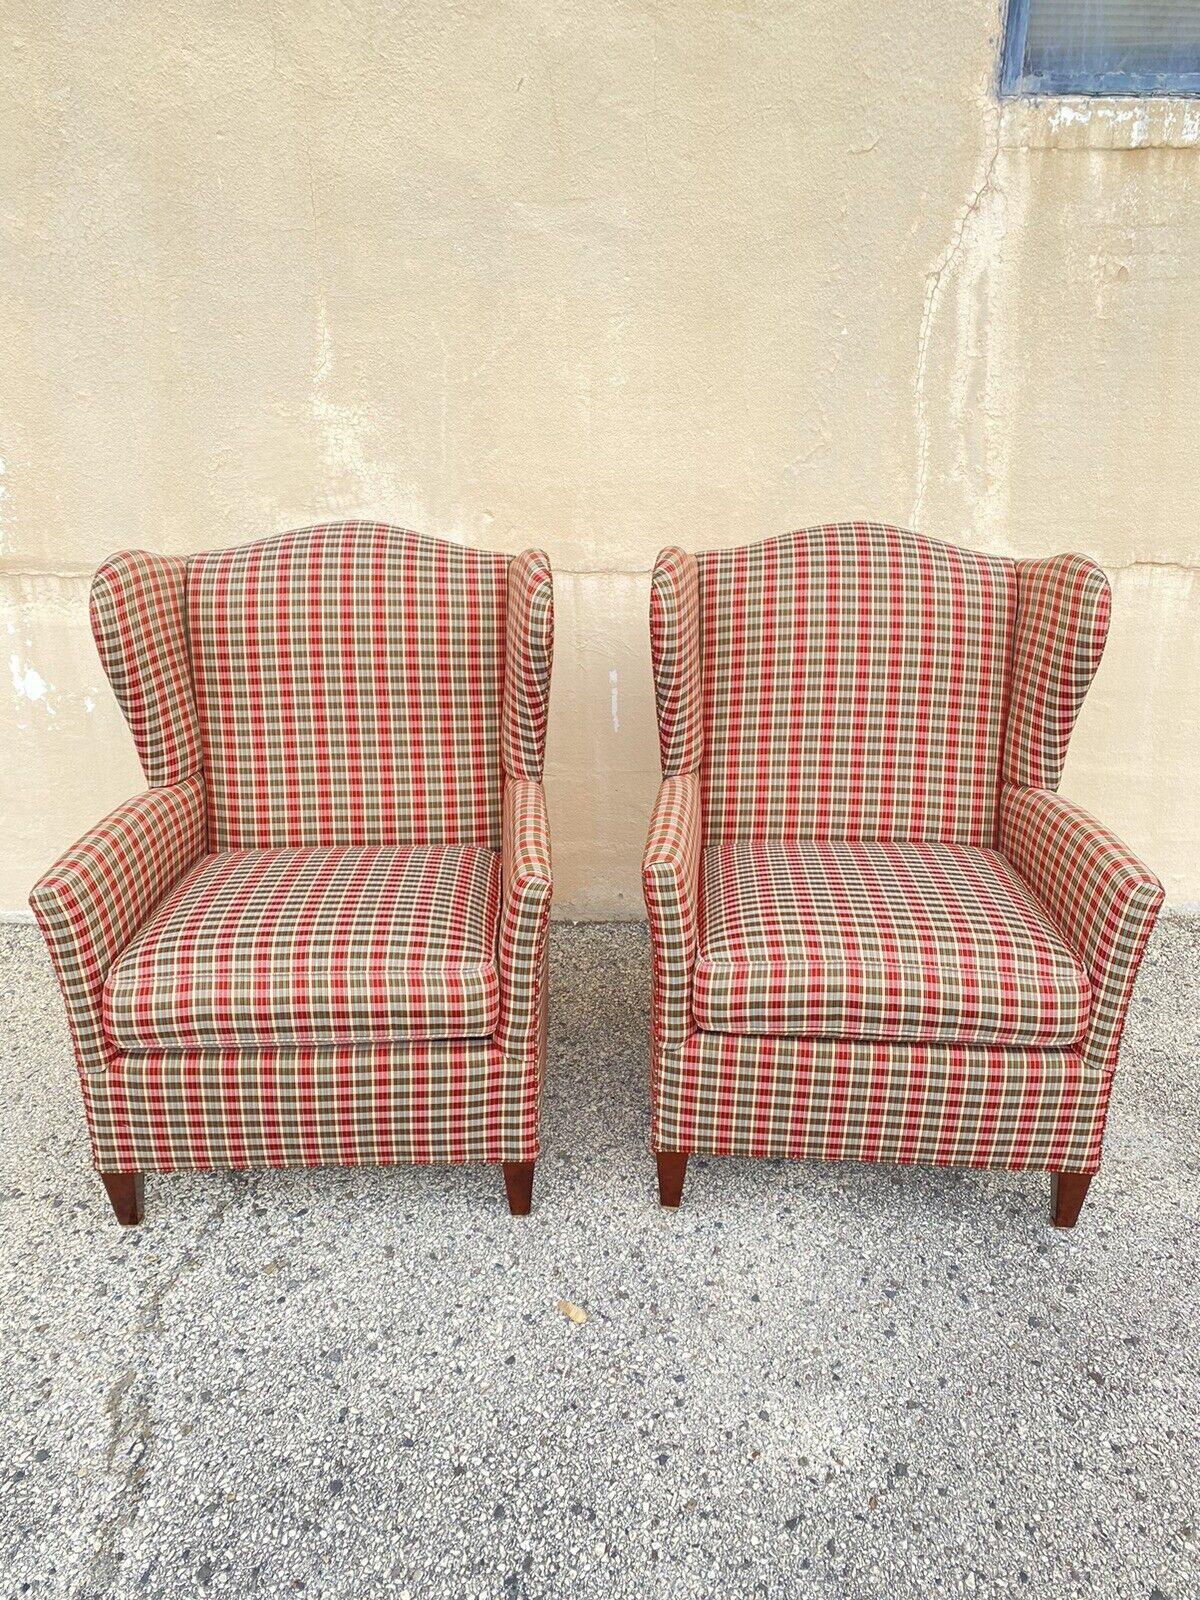 William Alan Green & Red Plaid Wingback Lounge Arm Club Chairs - a Pair. Item features very nice solid frames, original green and red plaid upholstery, shapely wingbacks, solid wood legs, original labels, quality American craftsmanship, great style